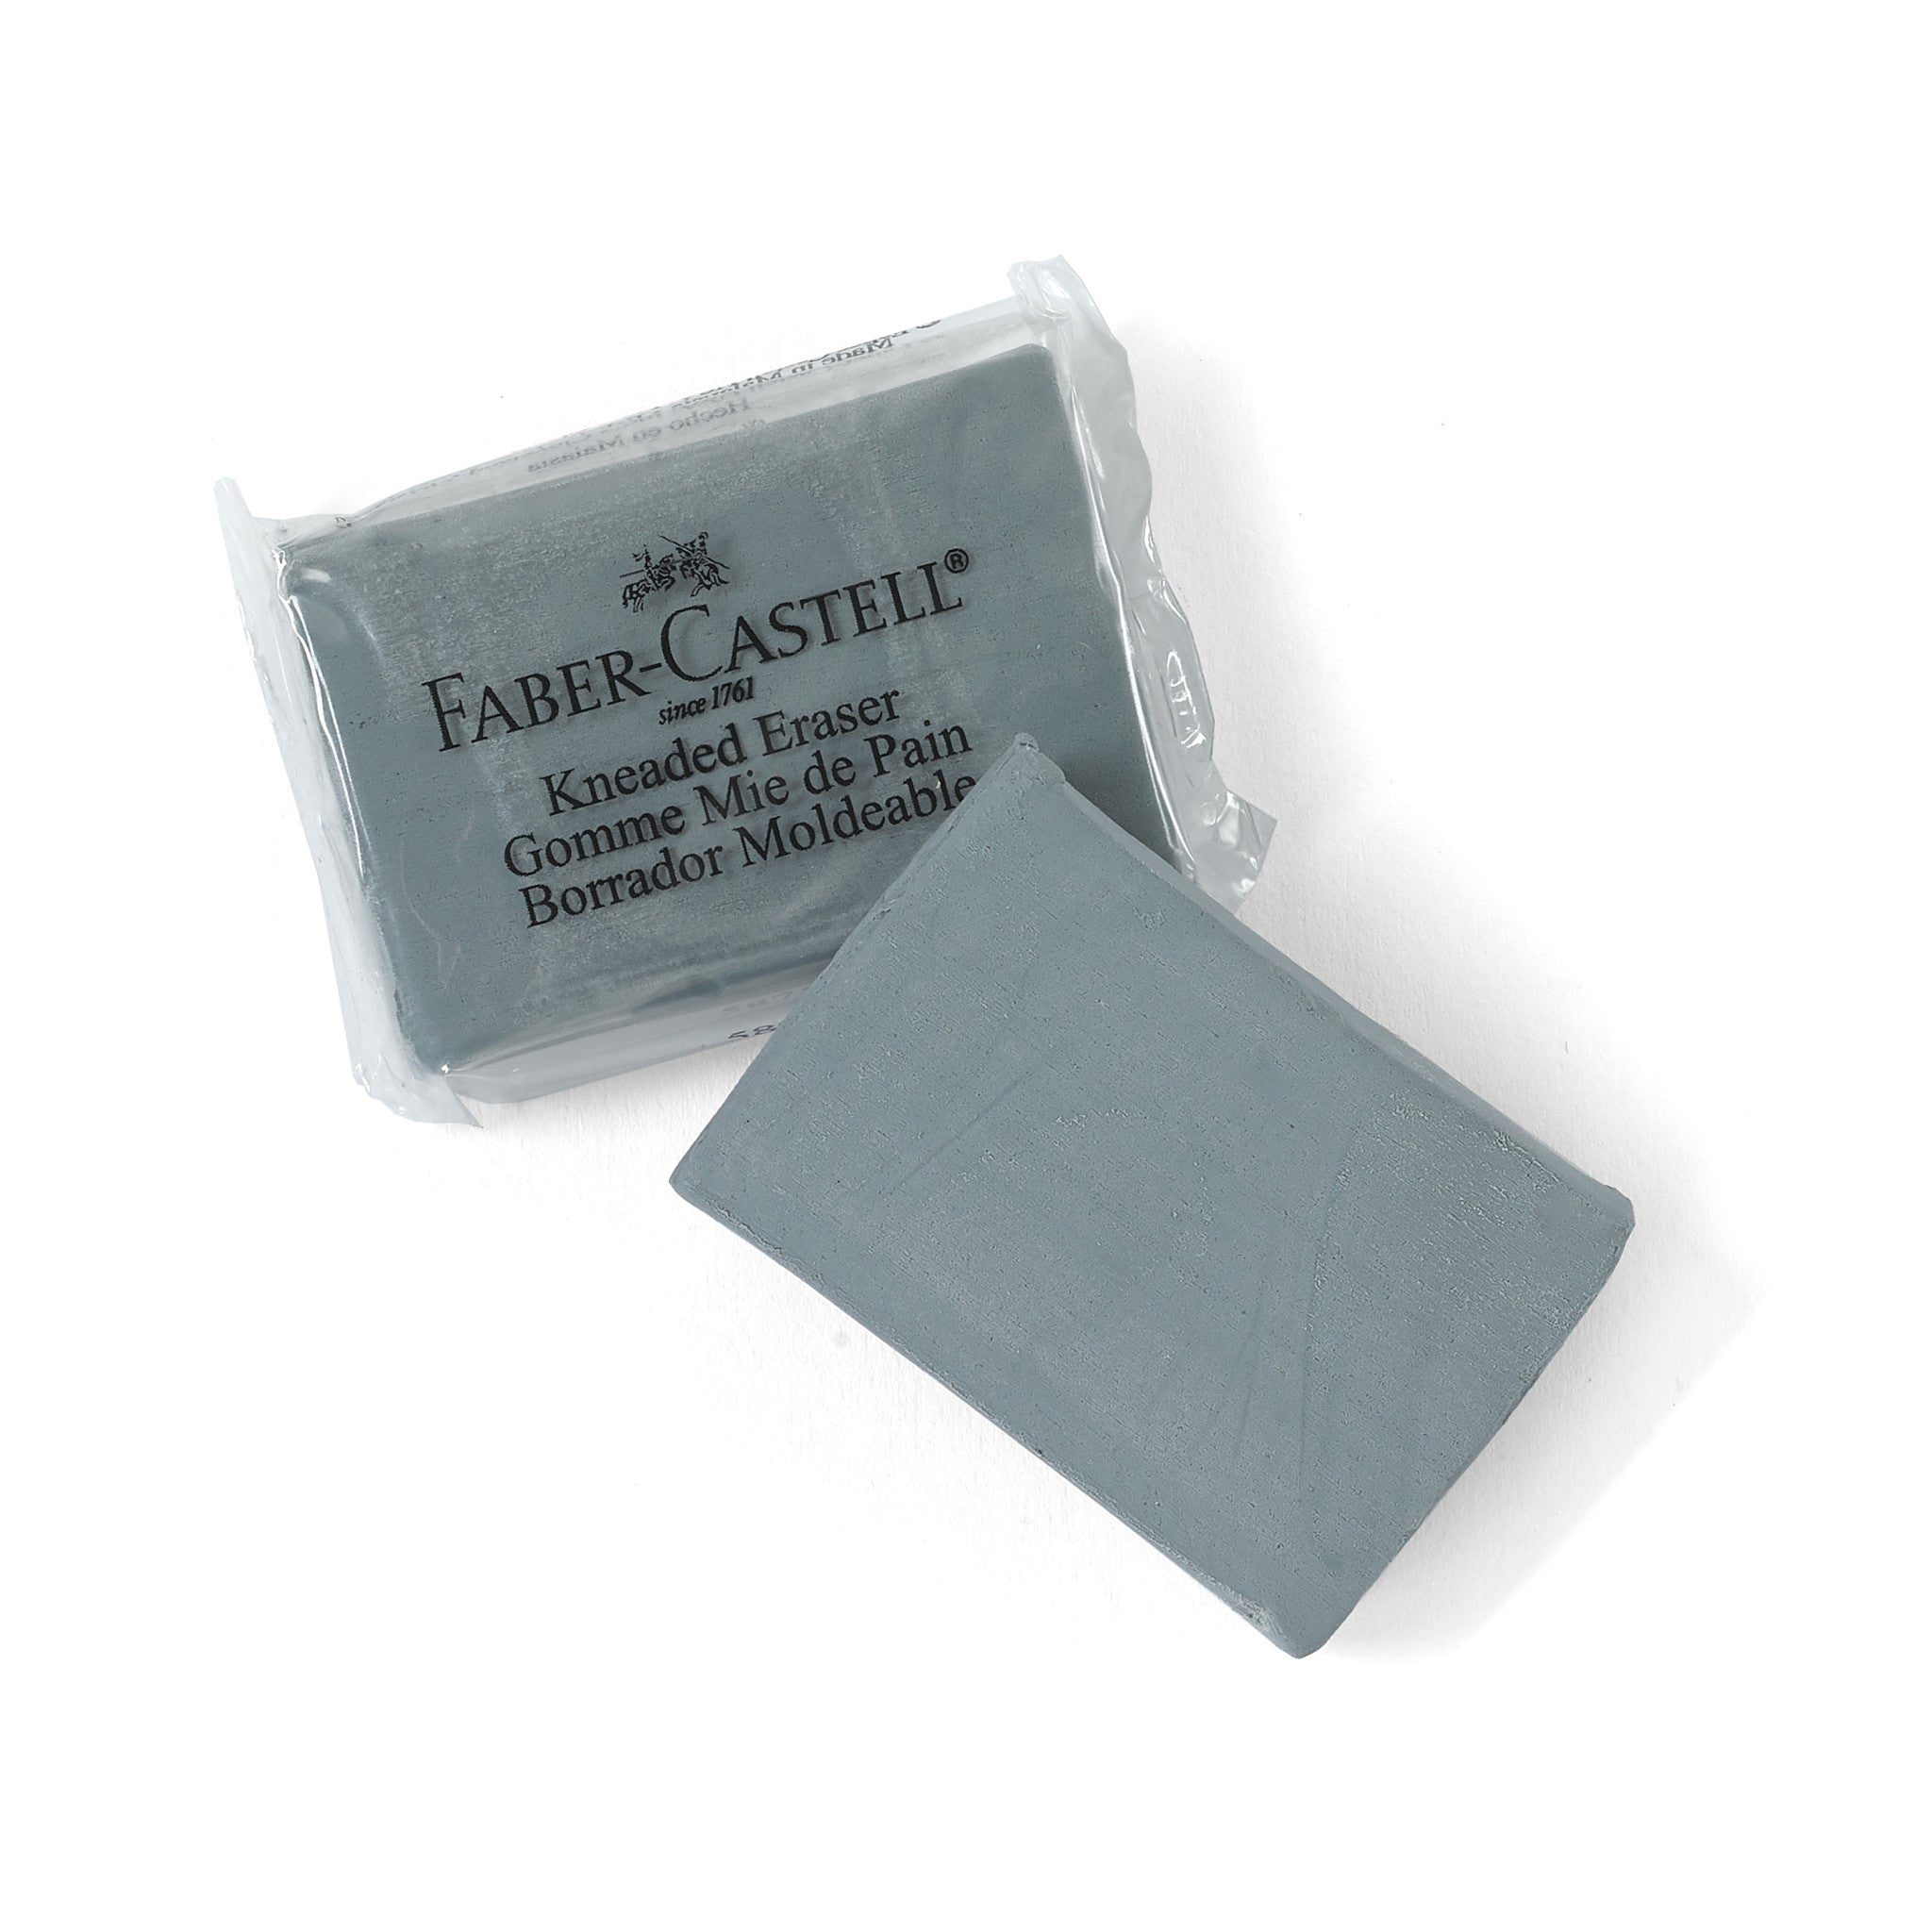 Faber-Castell Kneaded Erasers — Greenville Arms 1889 Inn